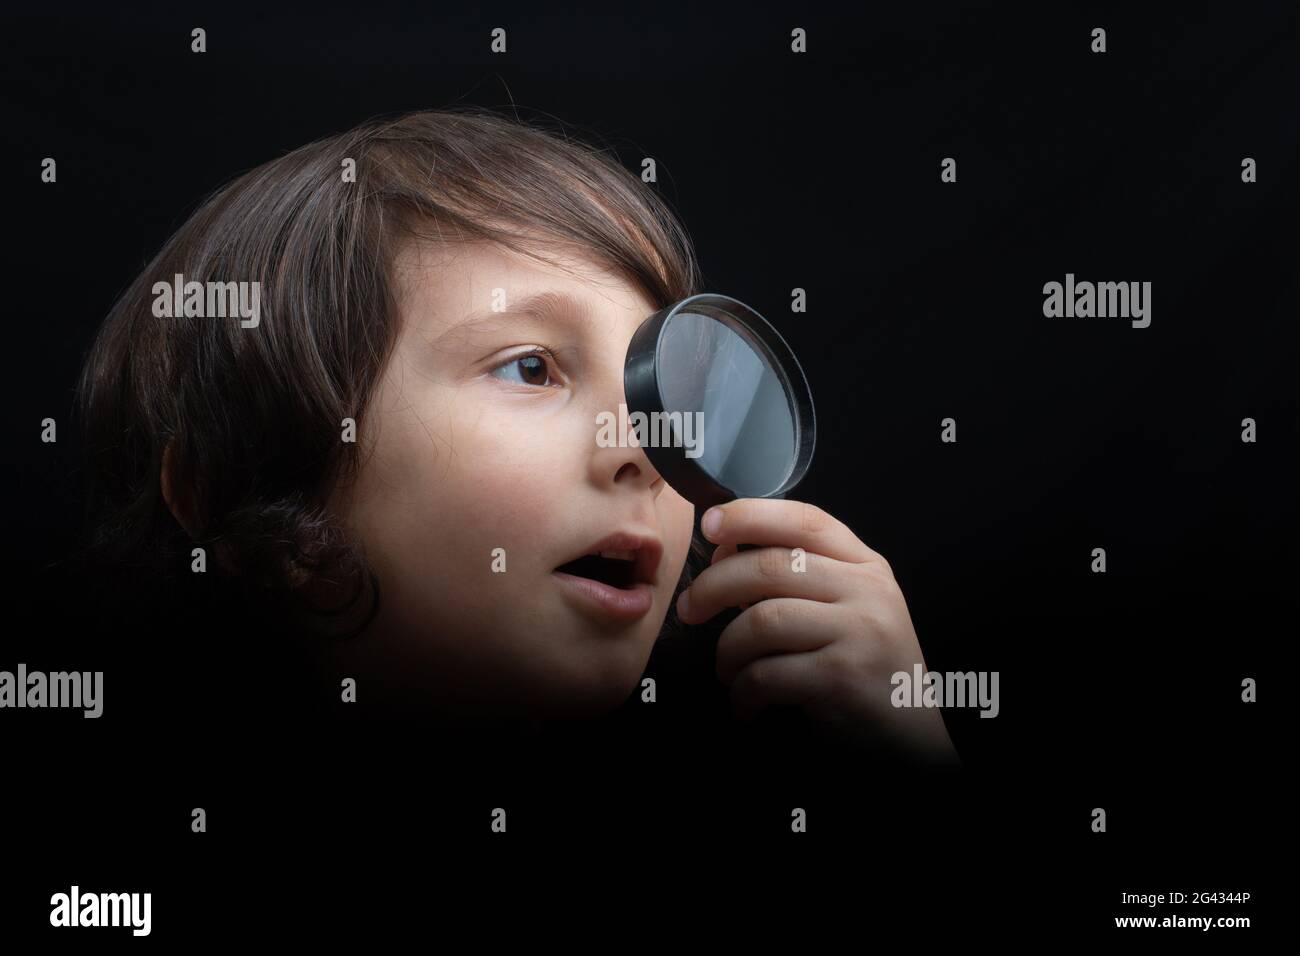 Portrat of a young boy looking through the magnifying glass Stock Photo